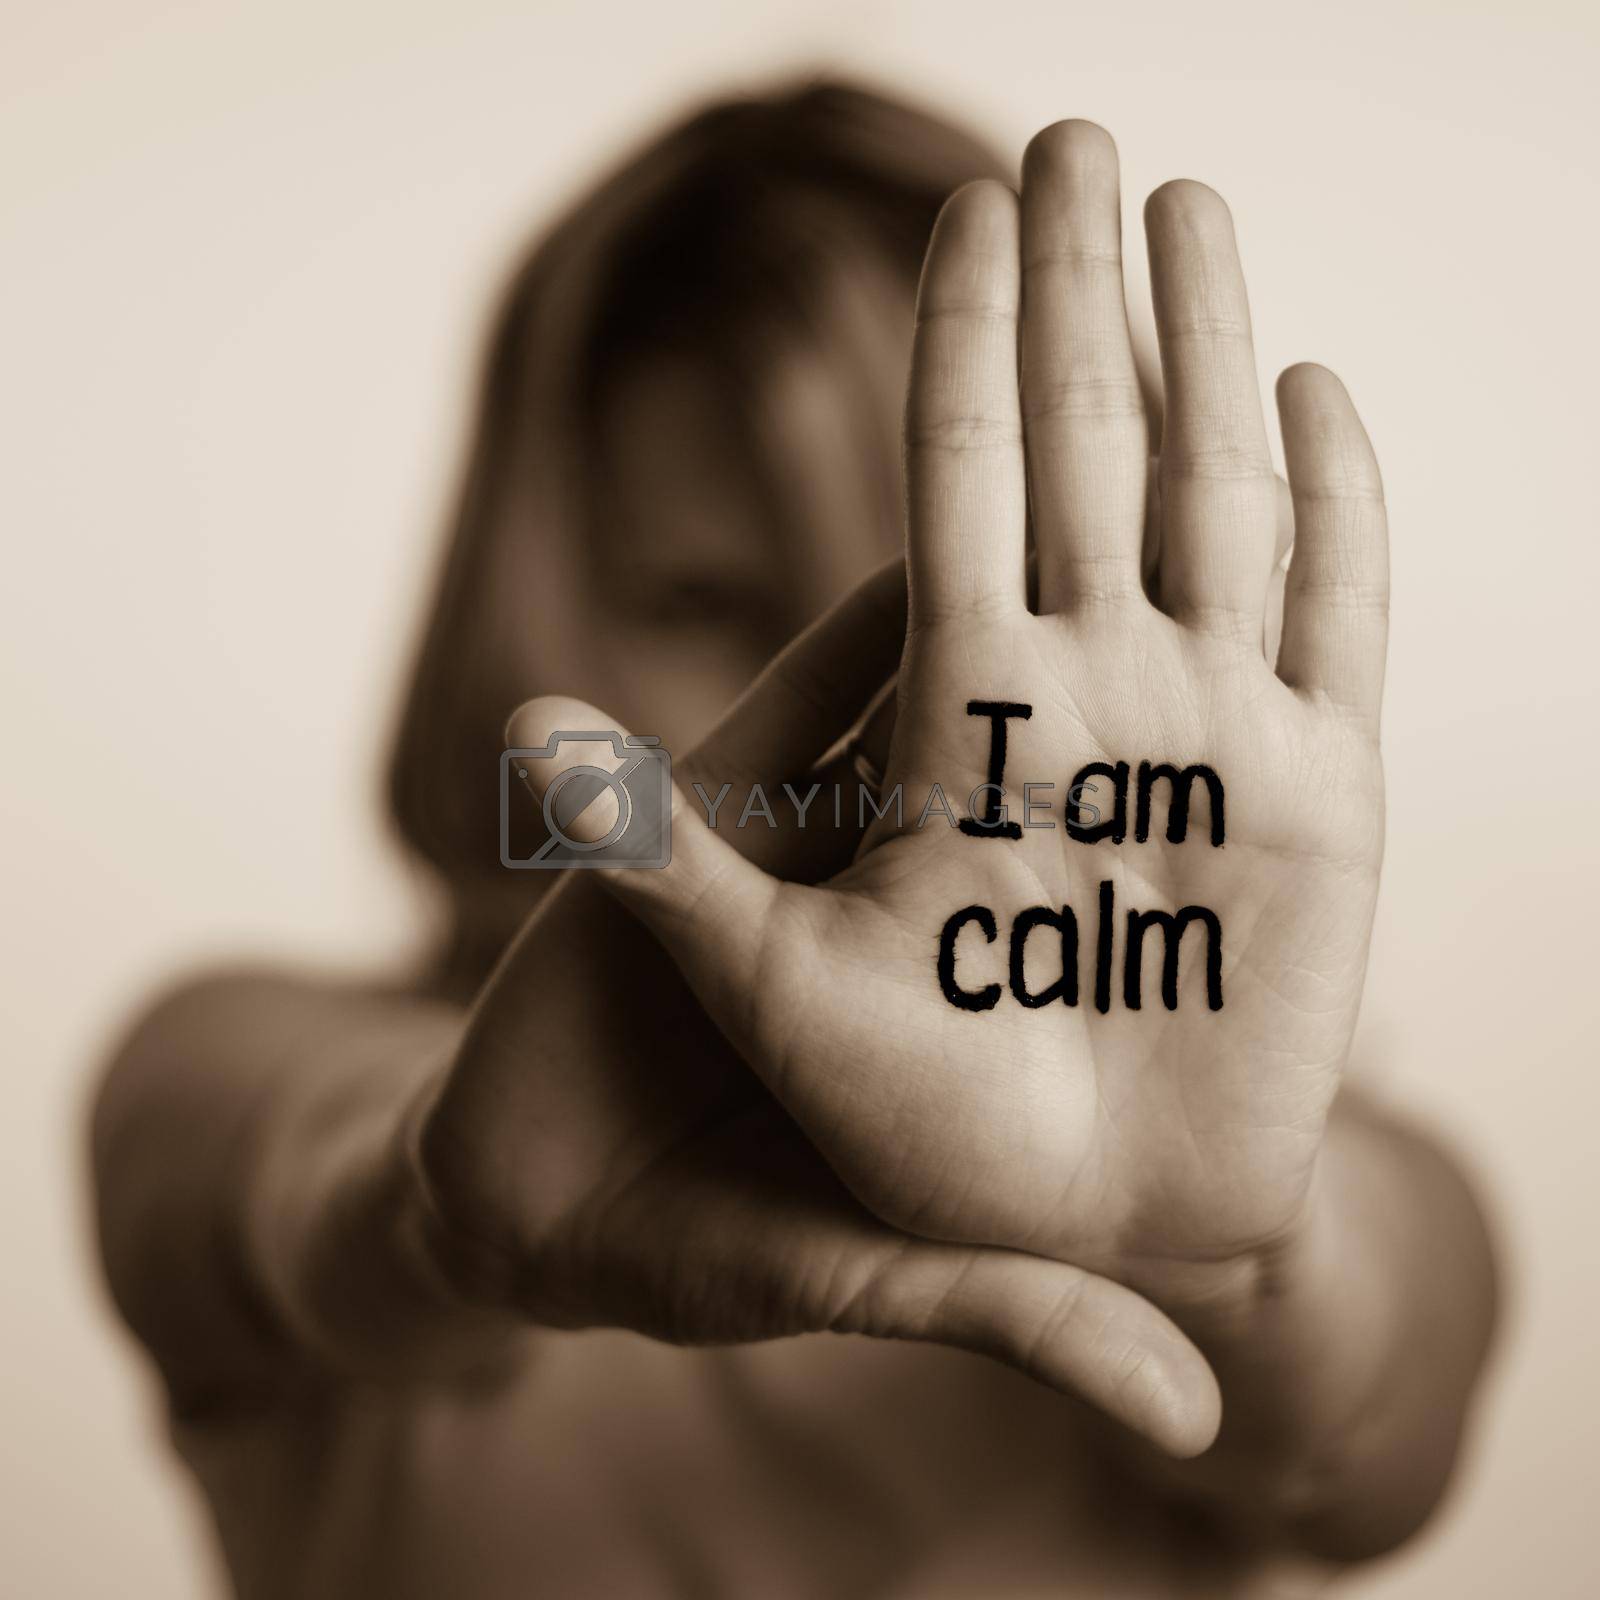 Royalty free image of sing I am calm by alf061